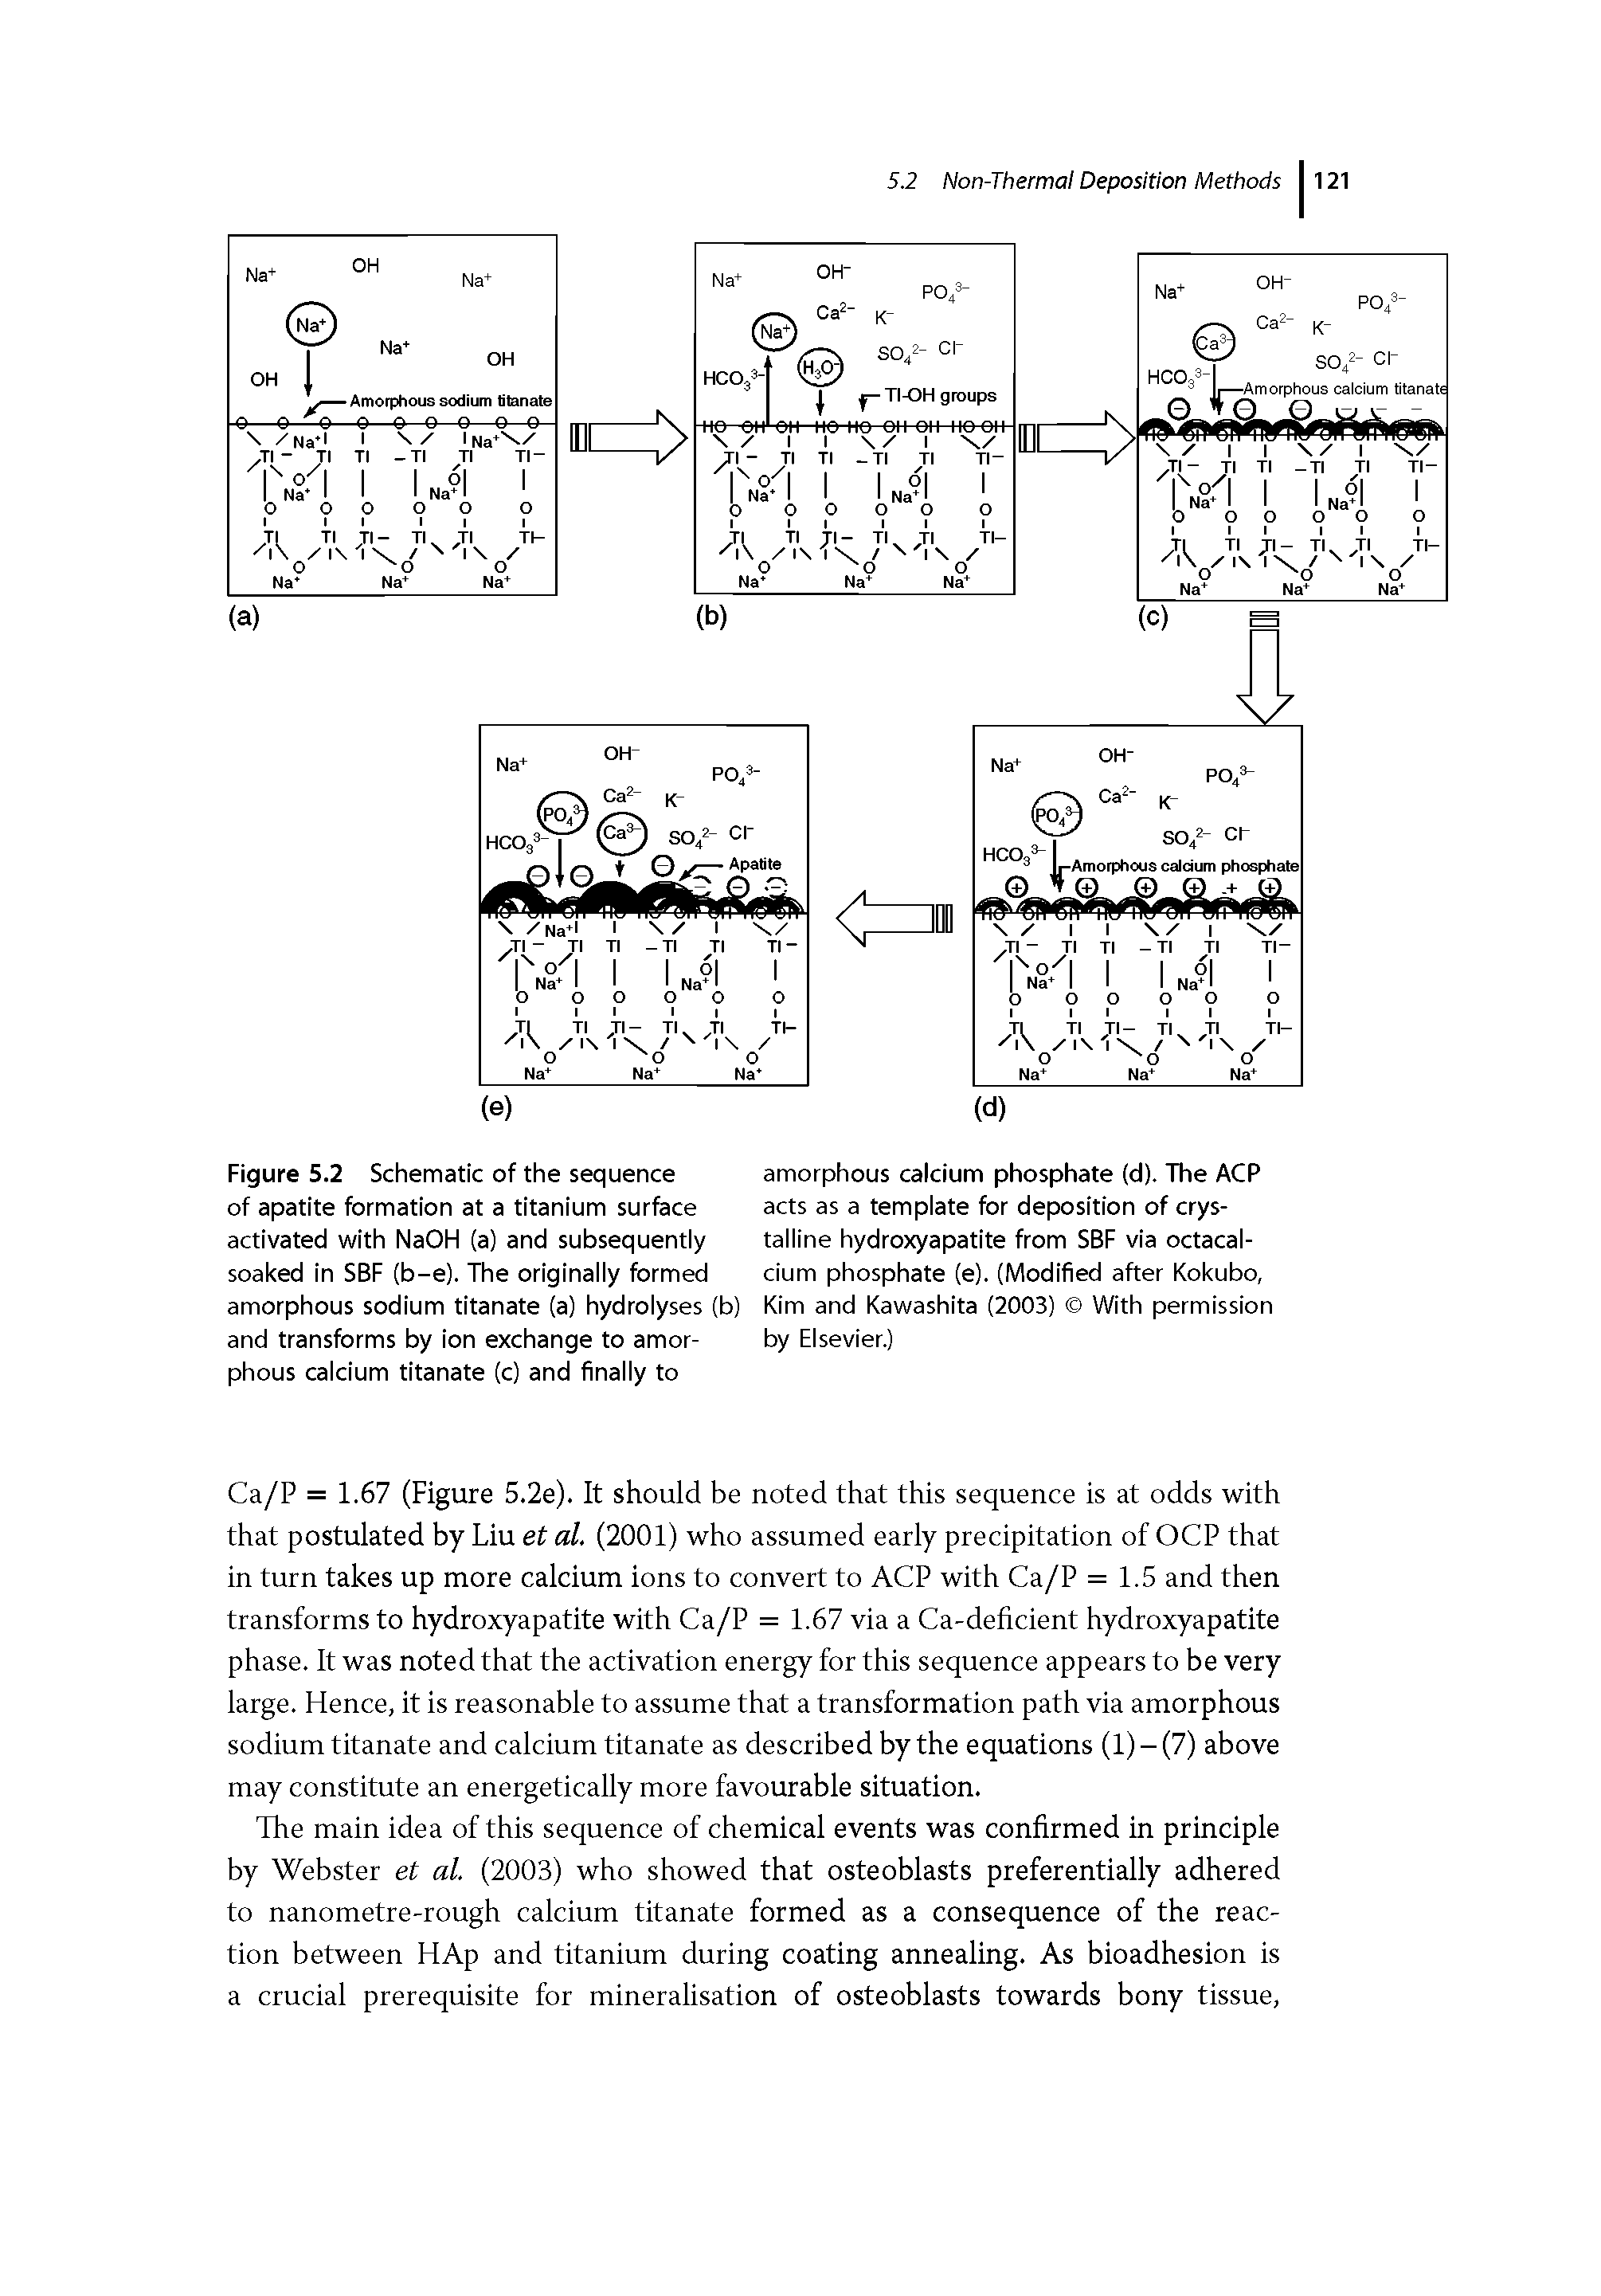 Figure 5.2 Schematic of the sequence of apatite formation at a titanium surface activated with NaOH (a) and subsequently soaked in SBF (b-e). The originally formed amorphous sodium titanate (a) hydrolyses (b) and transforms by ion exchange to amorphous calcium titanate (c) and finally to...